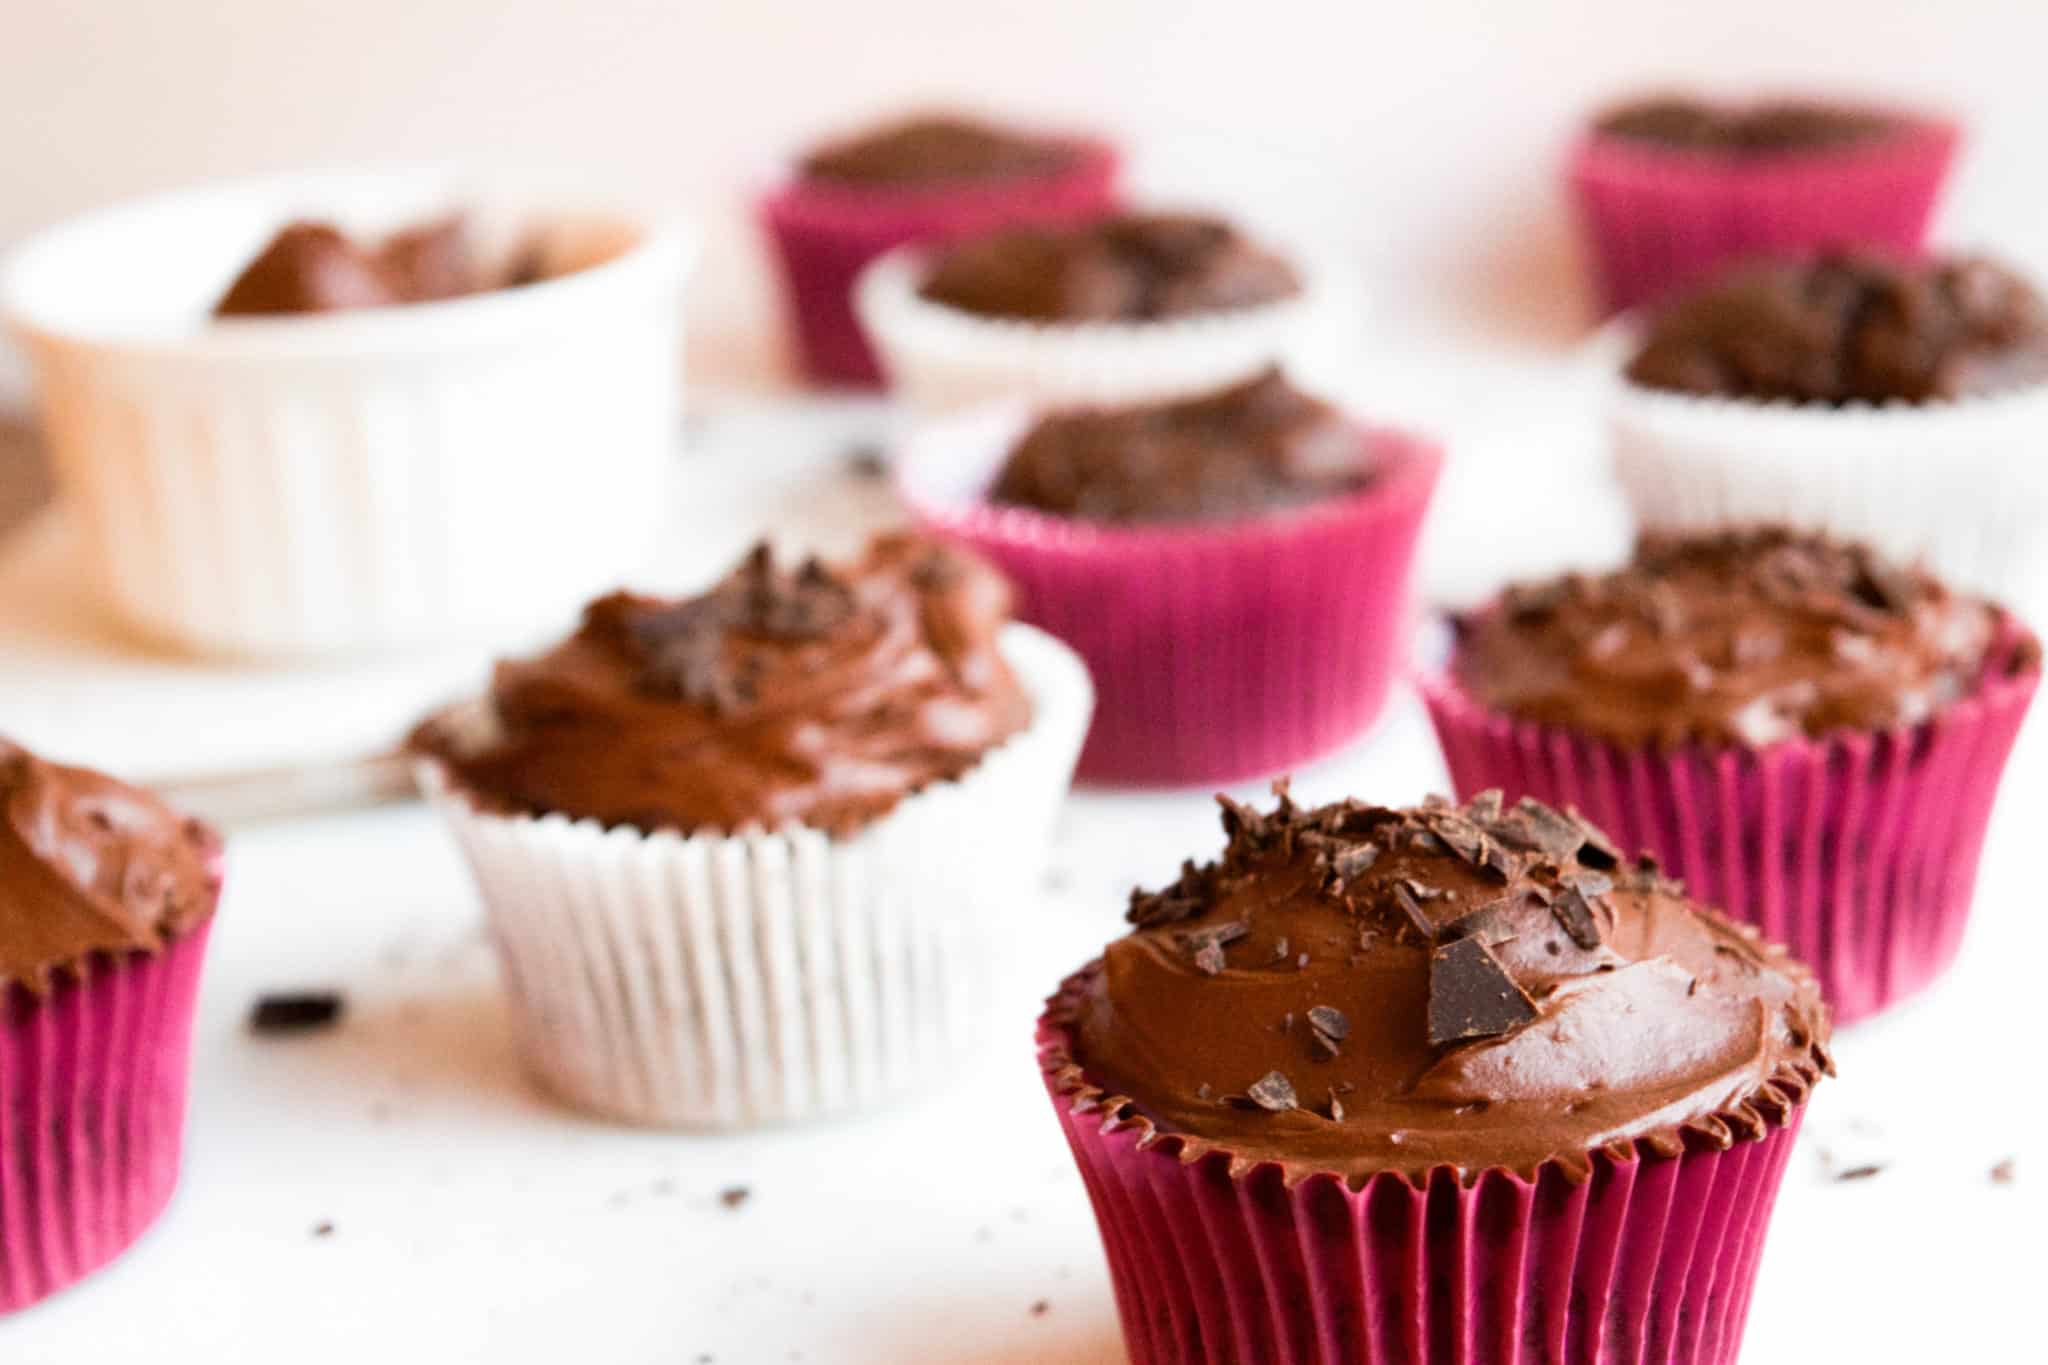 Yes You Can enjoy a moist and delicious cupcake with this simple, healthy chocolate cupcake recipe that everyone will love!